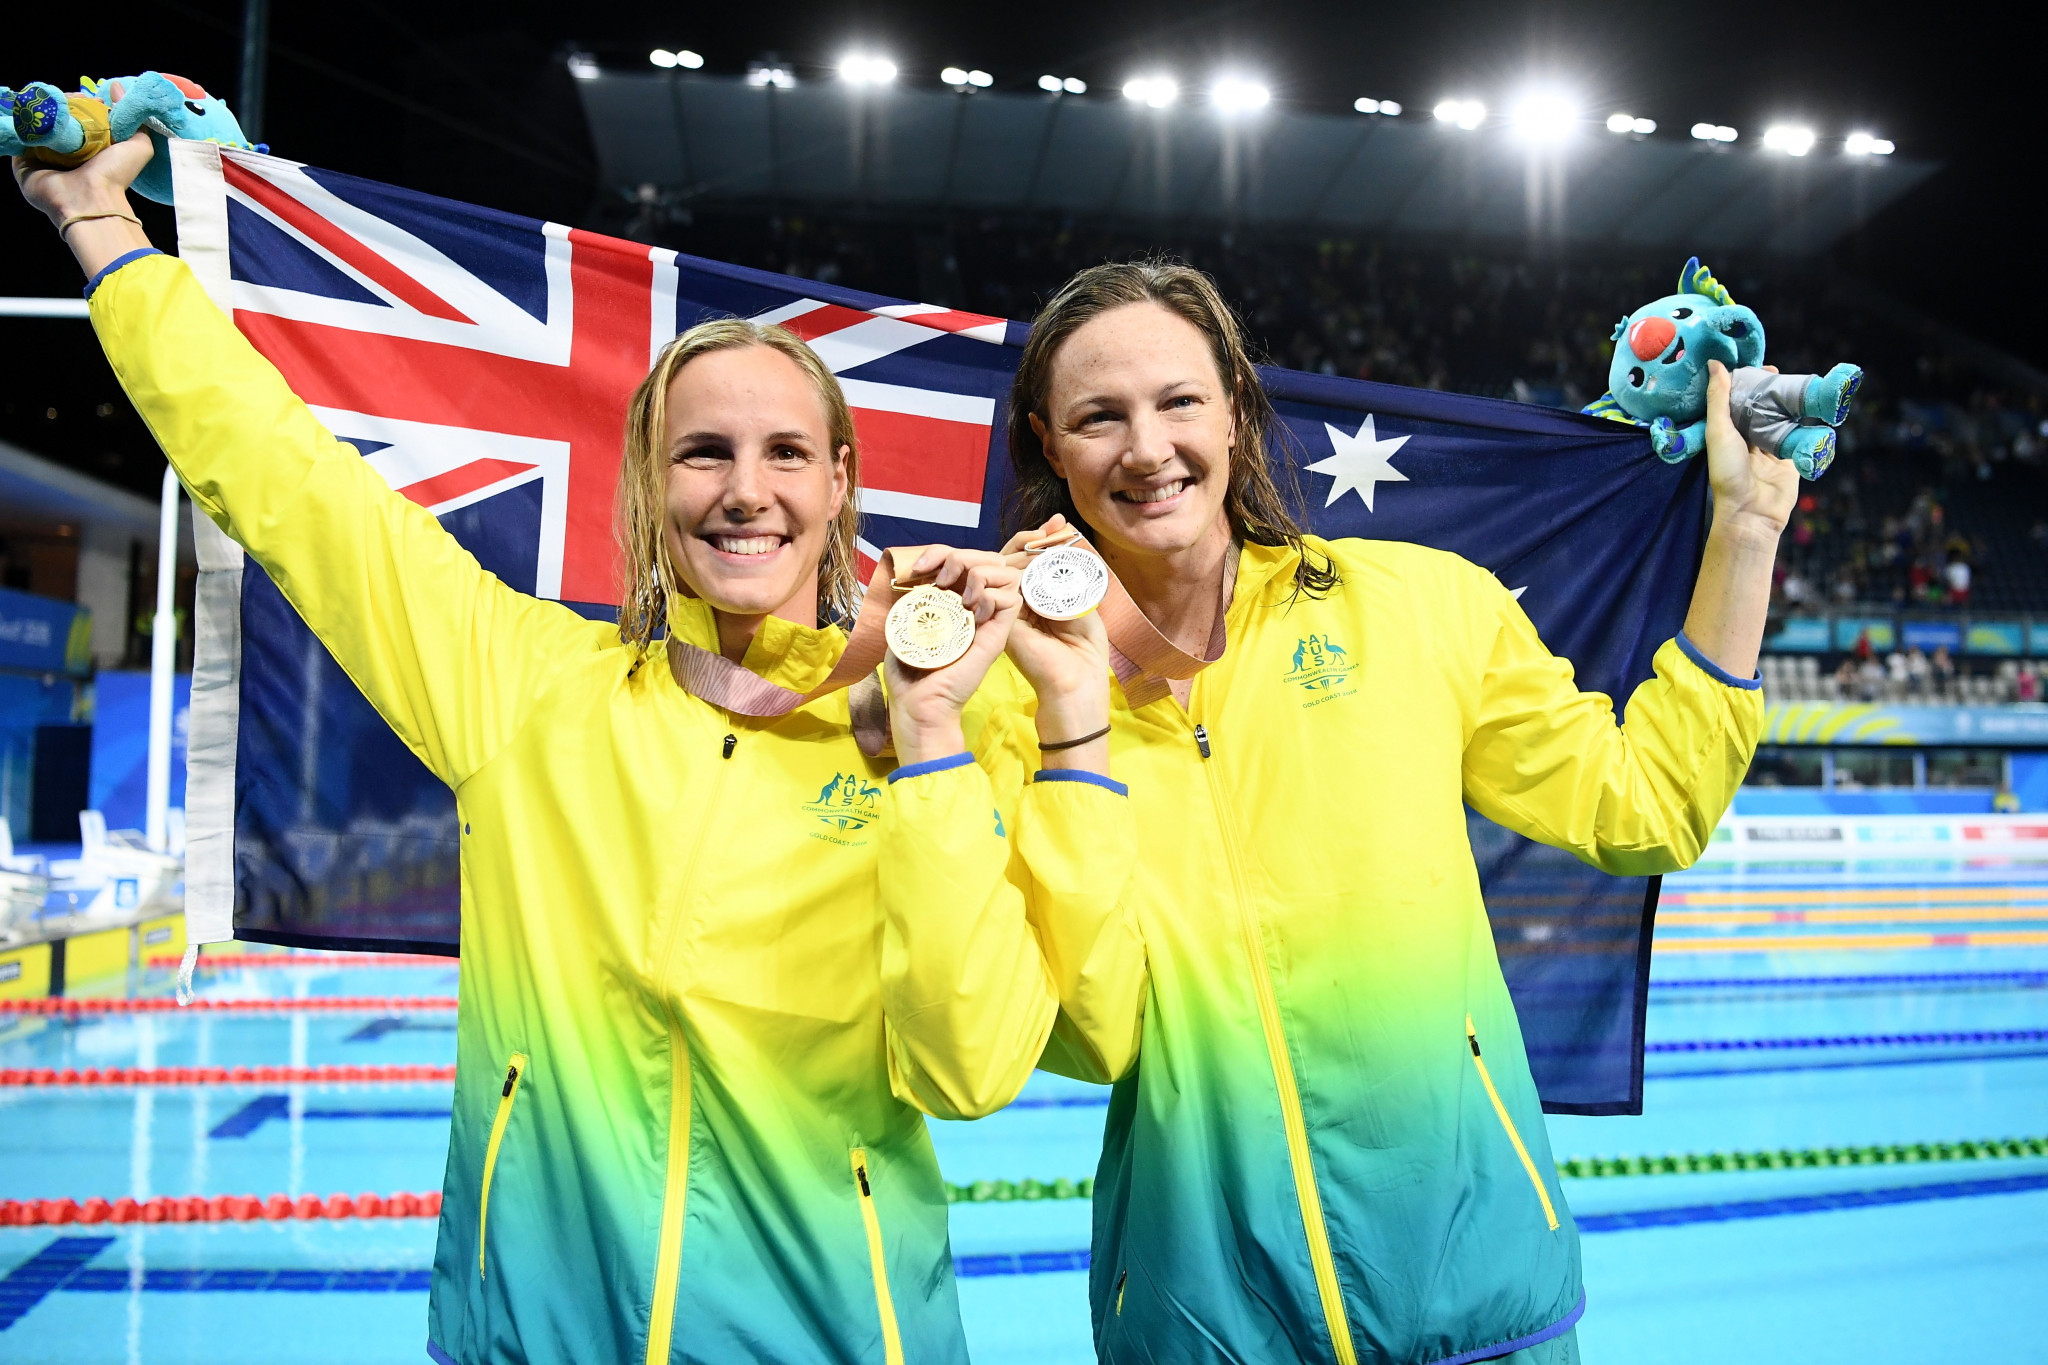 Australia's Bronte Campbell pipped sister Cate in a spectacular women's 100m freestyle final ©Getty Images